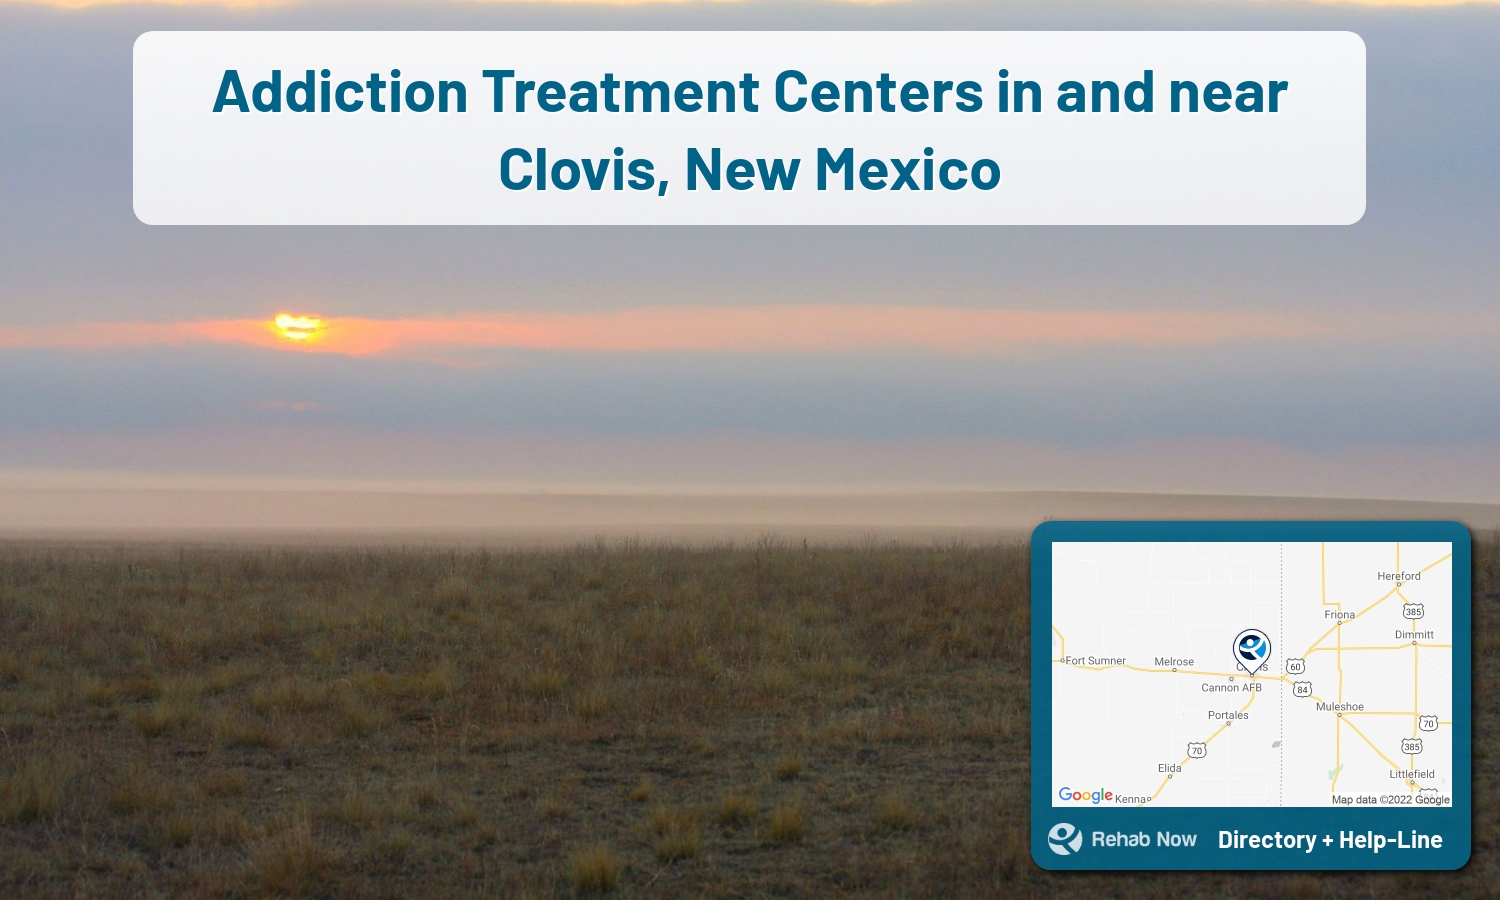 Those struggling with addiction can find help through addiction rehab facilities in Clovis, NM. Get help now!